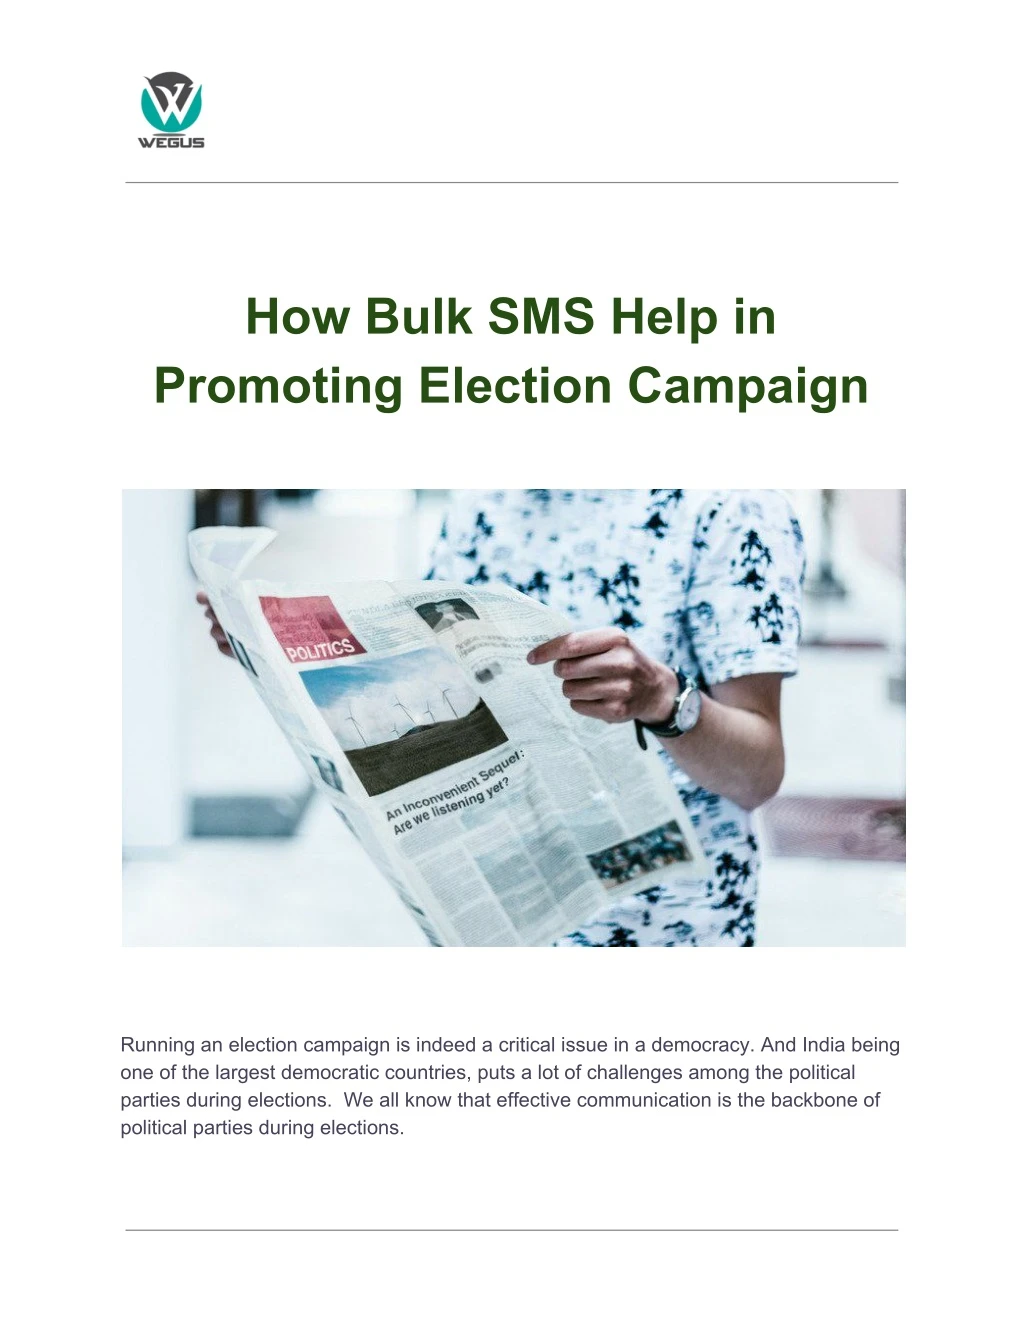 how bulk sms help in promoting election campaign